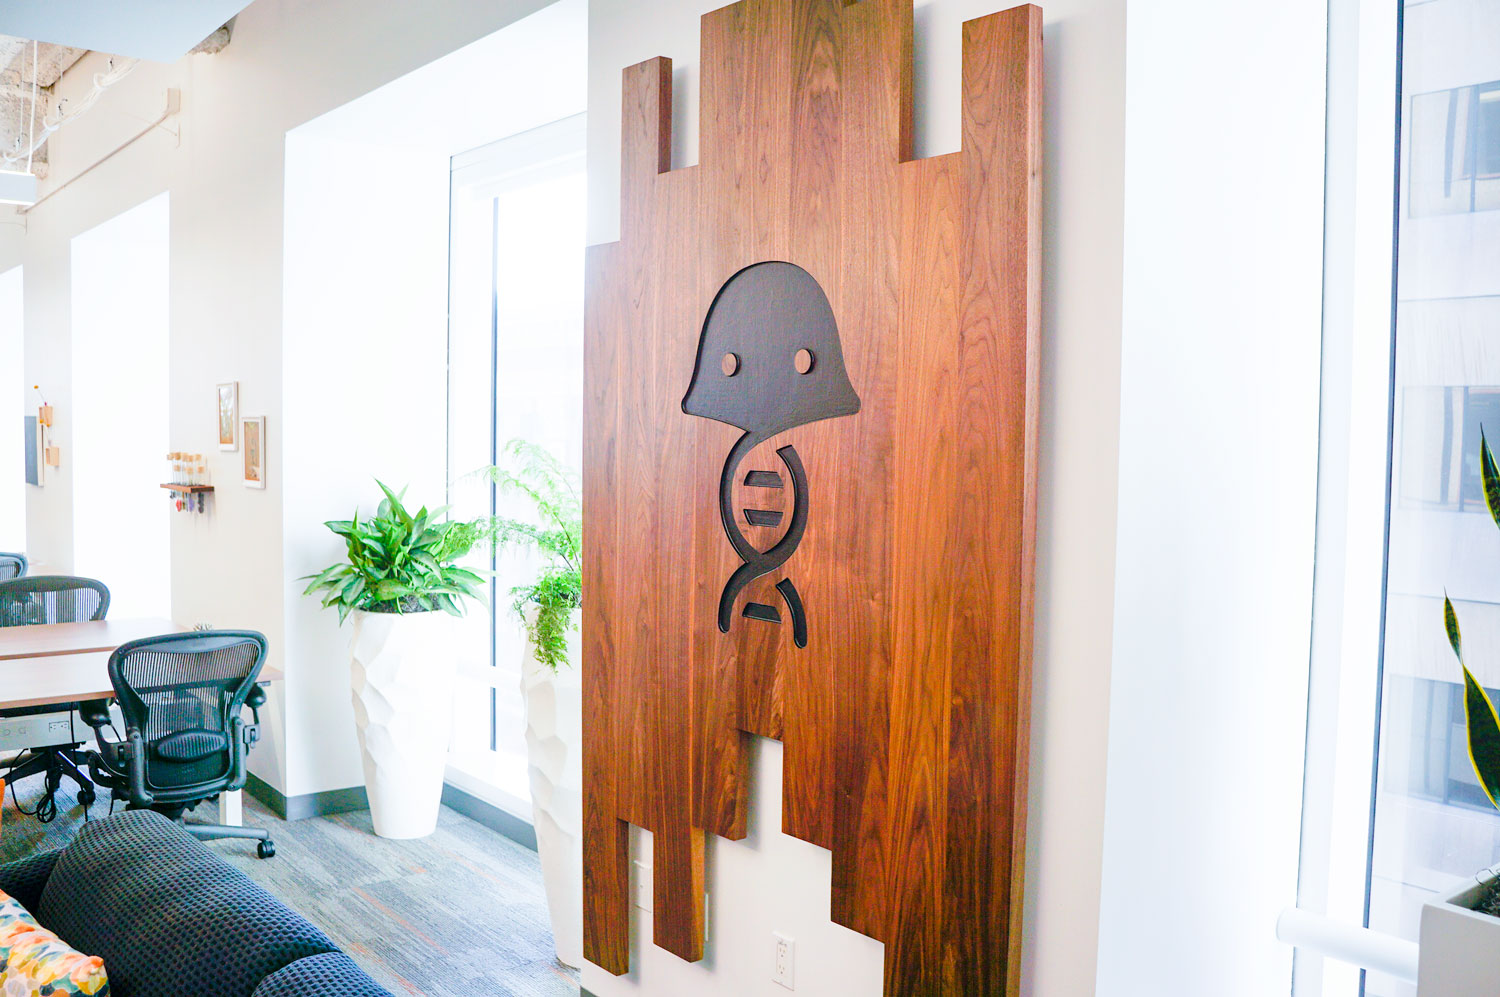 Solid walnut slat sign with engraved jellyfish for the office of Benchling, a San Francisco based company working on a unified platform to accelerate, measure, and forecast R&D from discovery through bioprocessing.